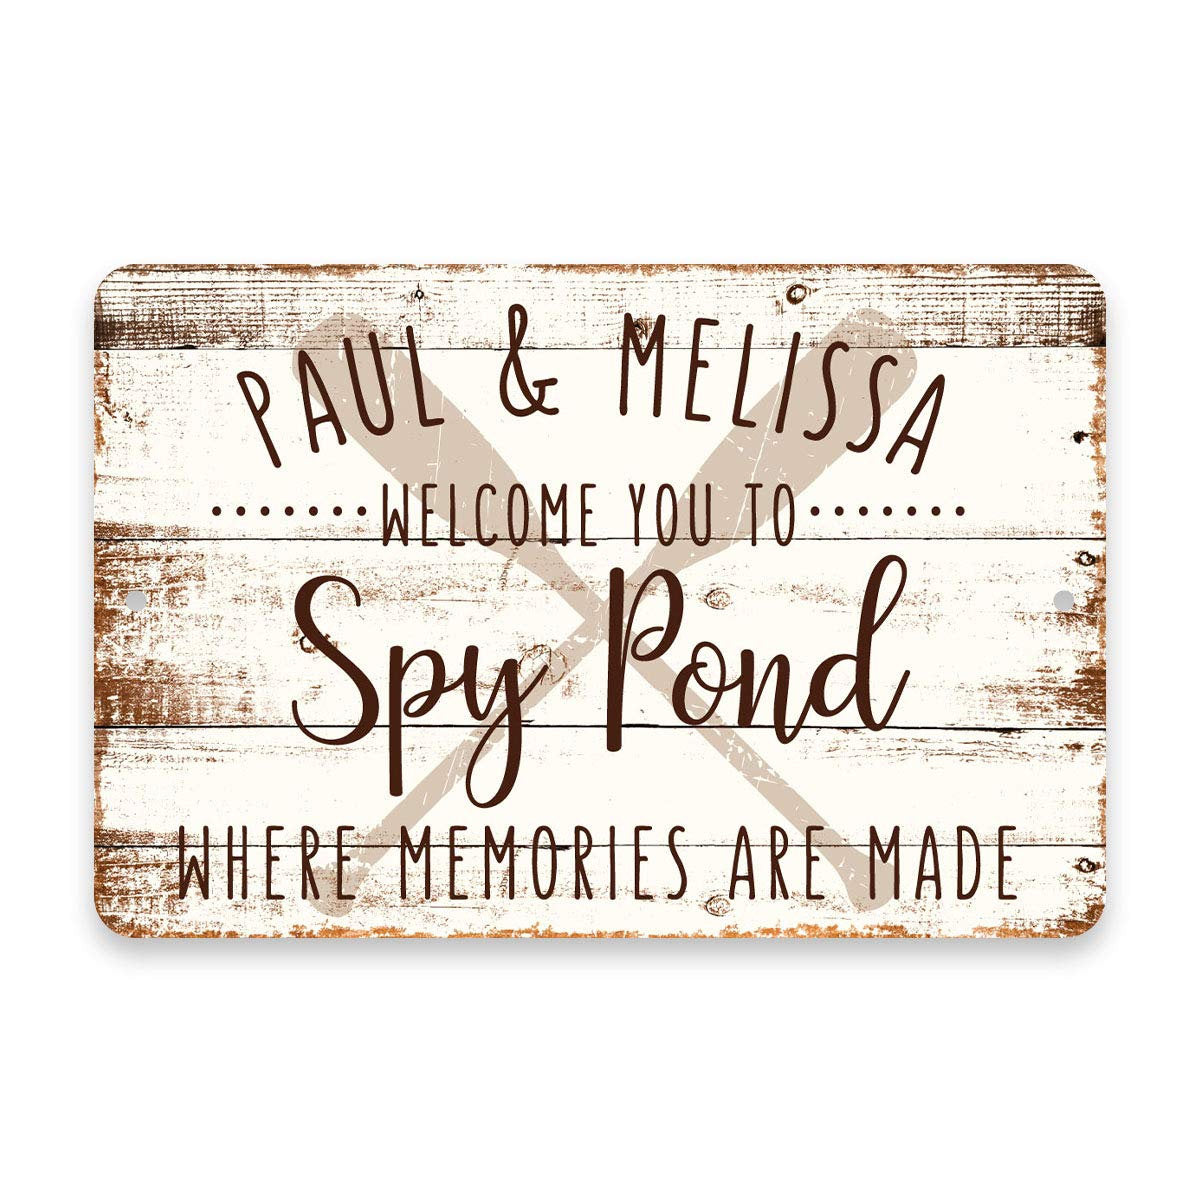 Personalized Welcome to Spy Pond Where Memories are Made Sign - 8 X 12 Metal Sign with Wood Look